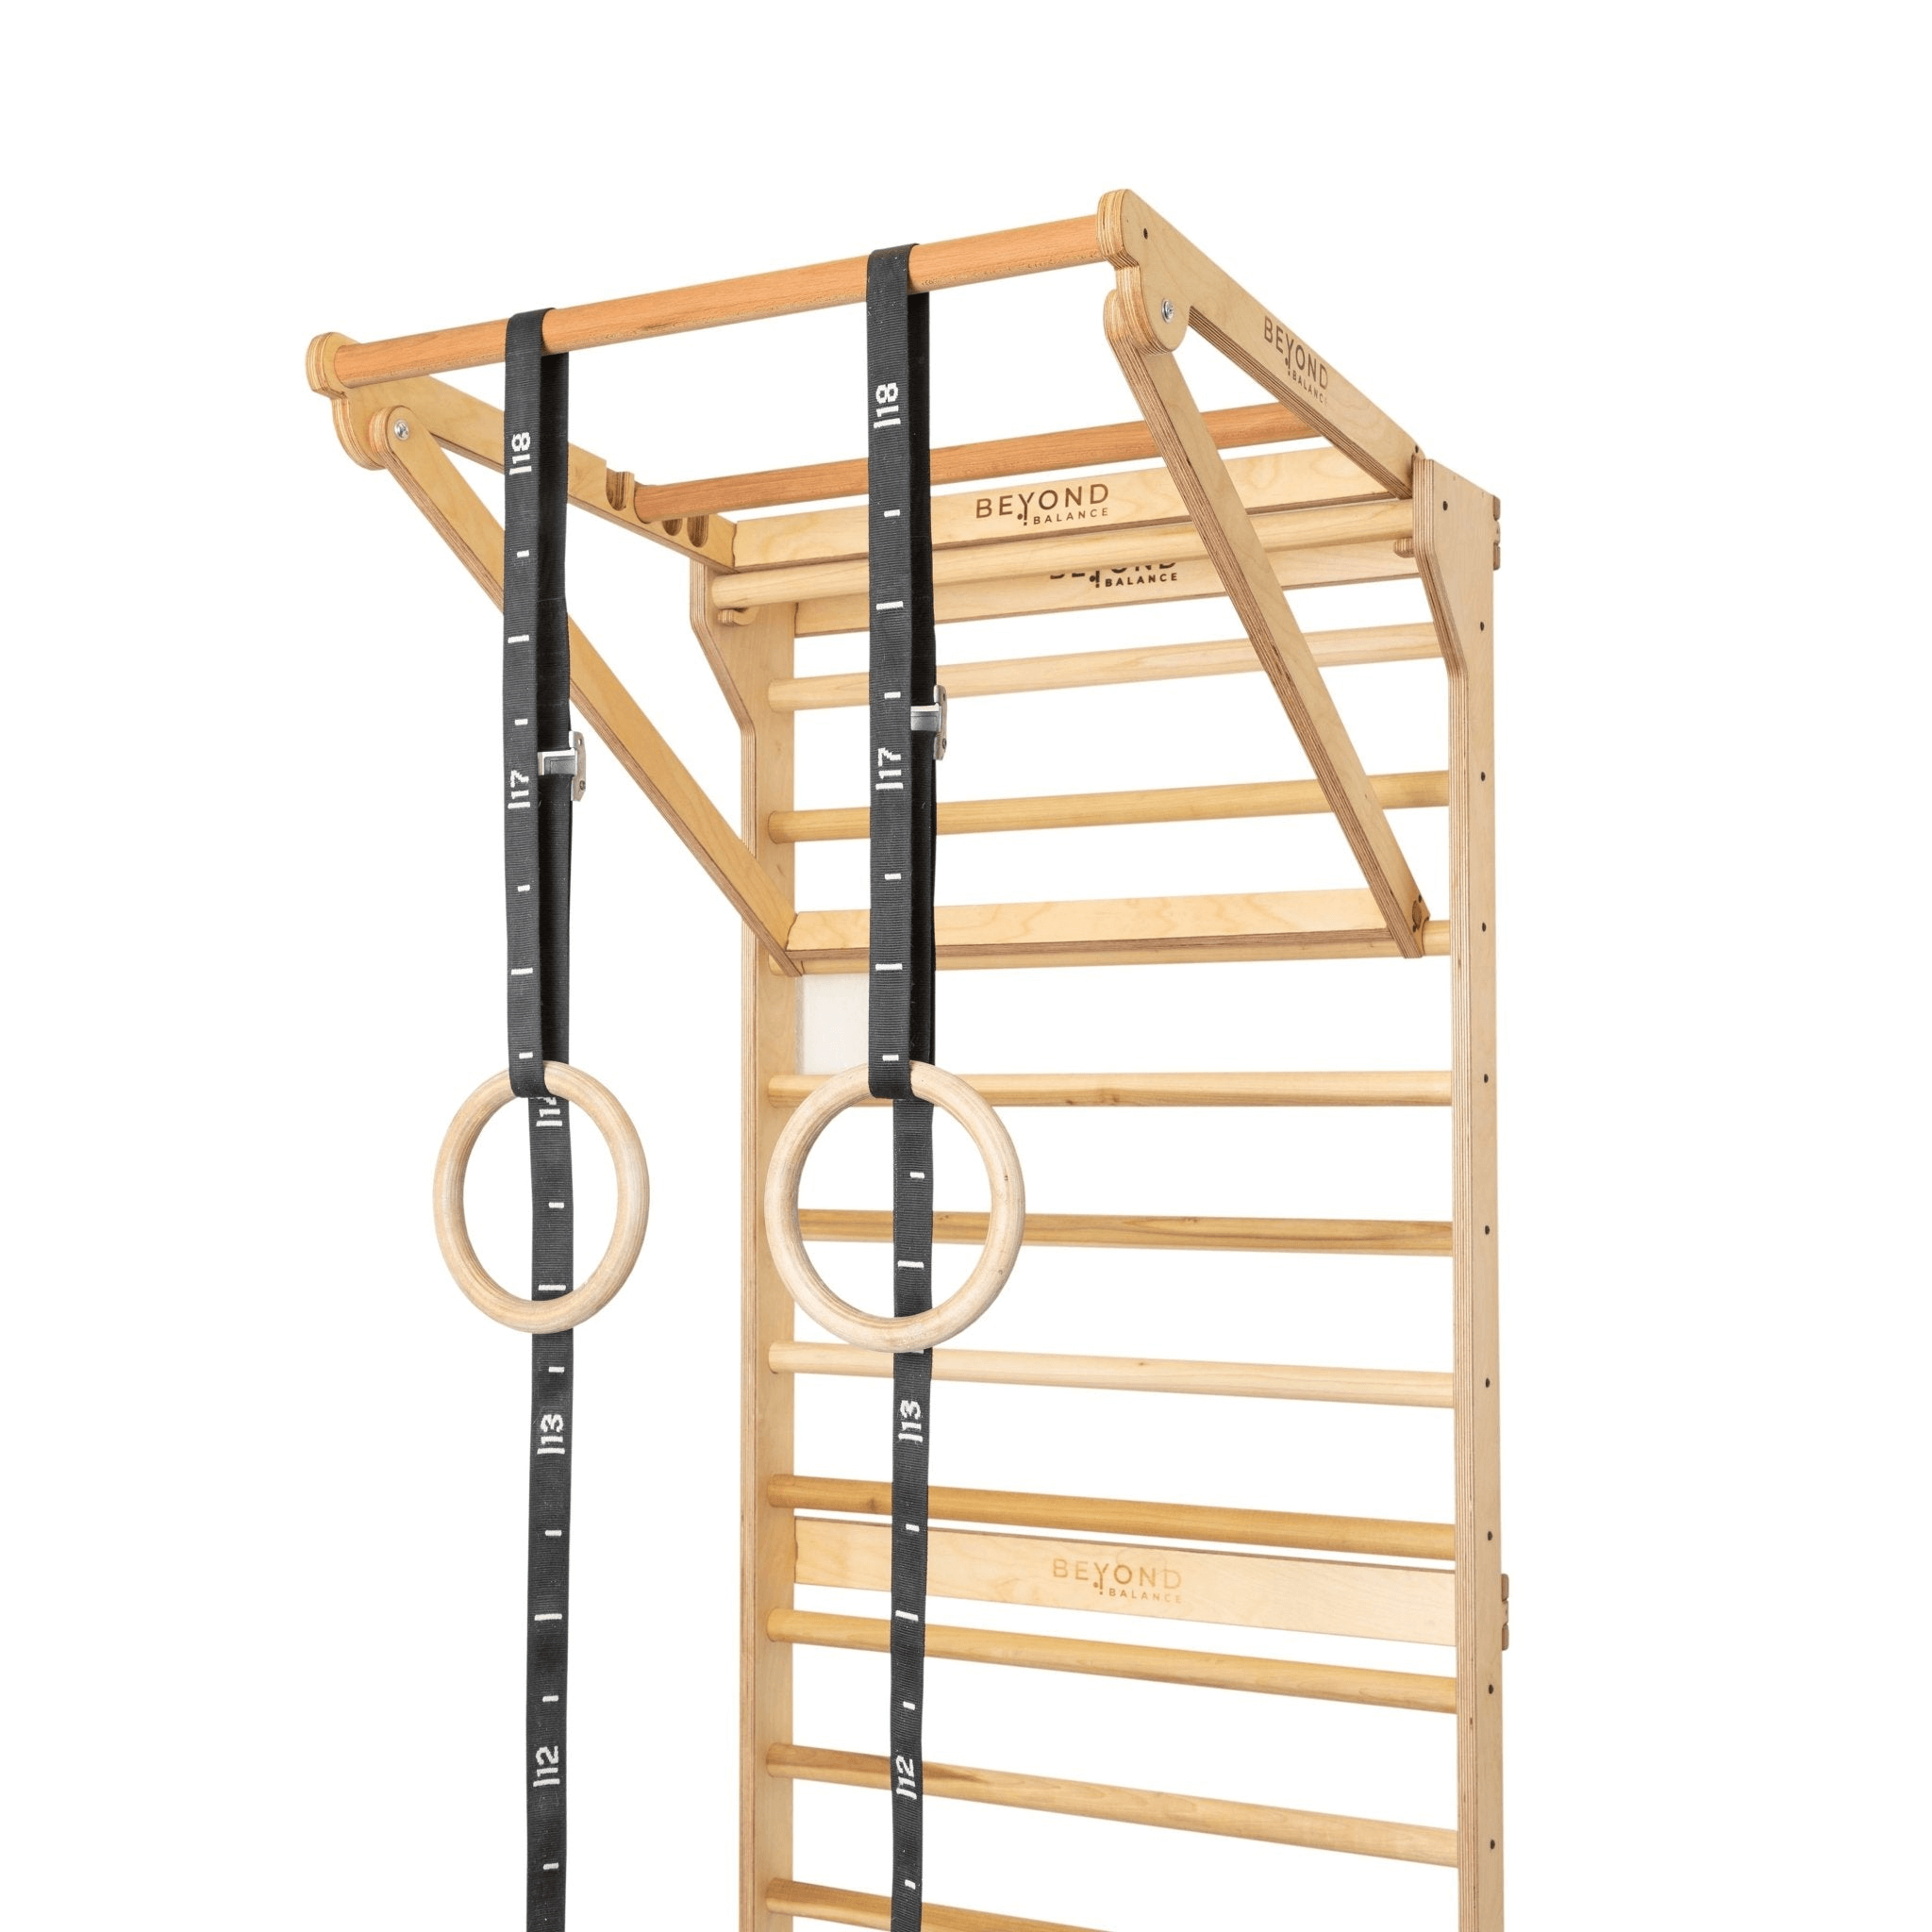 Personal Training Stations: Wood Swedish Ladder Stall Bars and Pull-Up Dip Bar - Fitness Station 31.5" Round (Fitness model)PoplarBeyond BalanceFitness and Physical Therapy EquipmentRecovAthlete